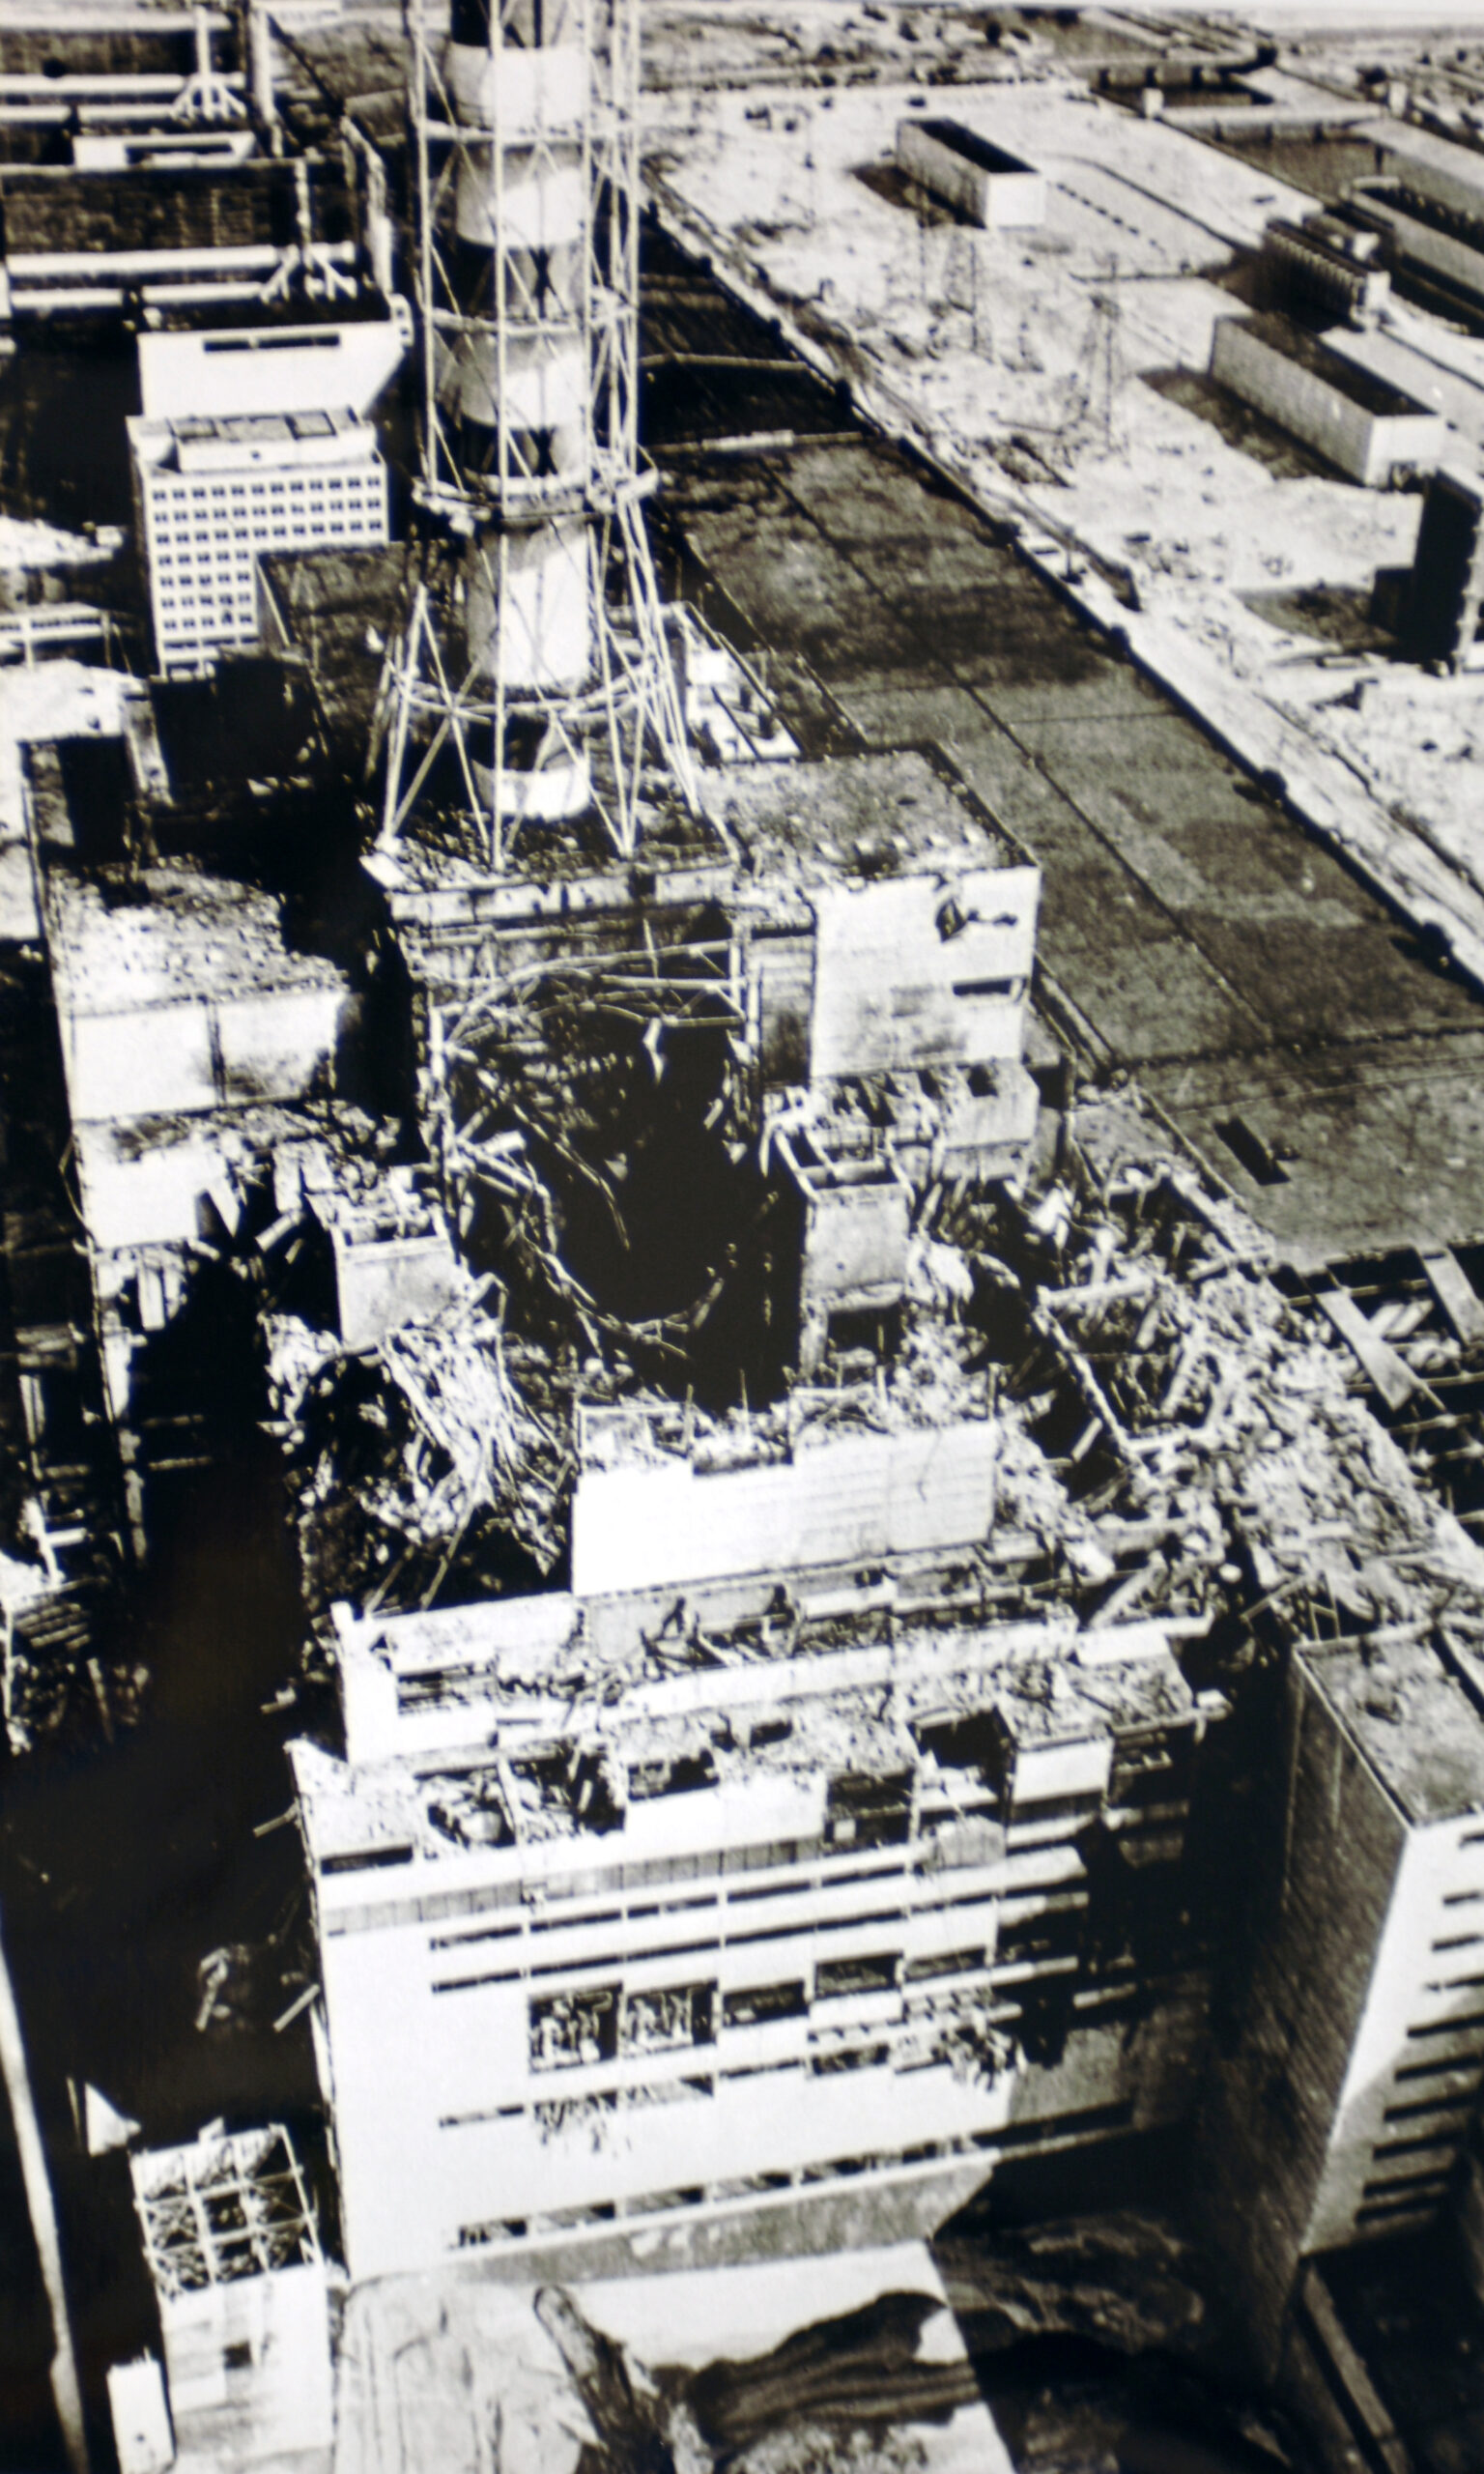 Remembering Chernobyl: 35 years on